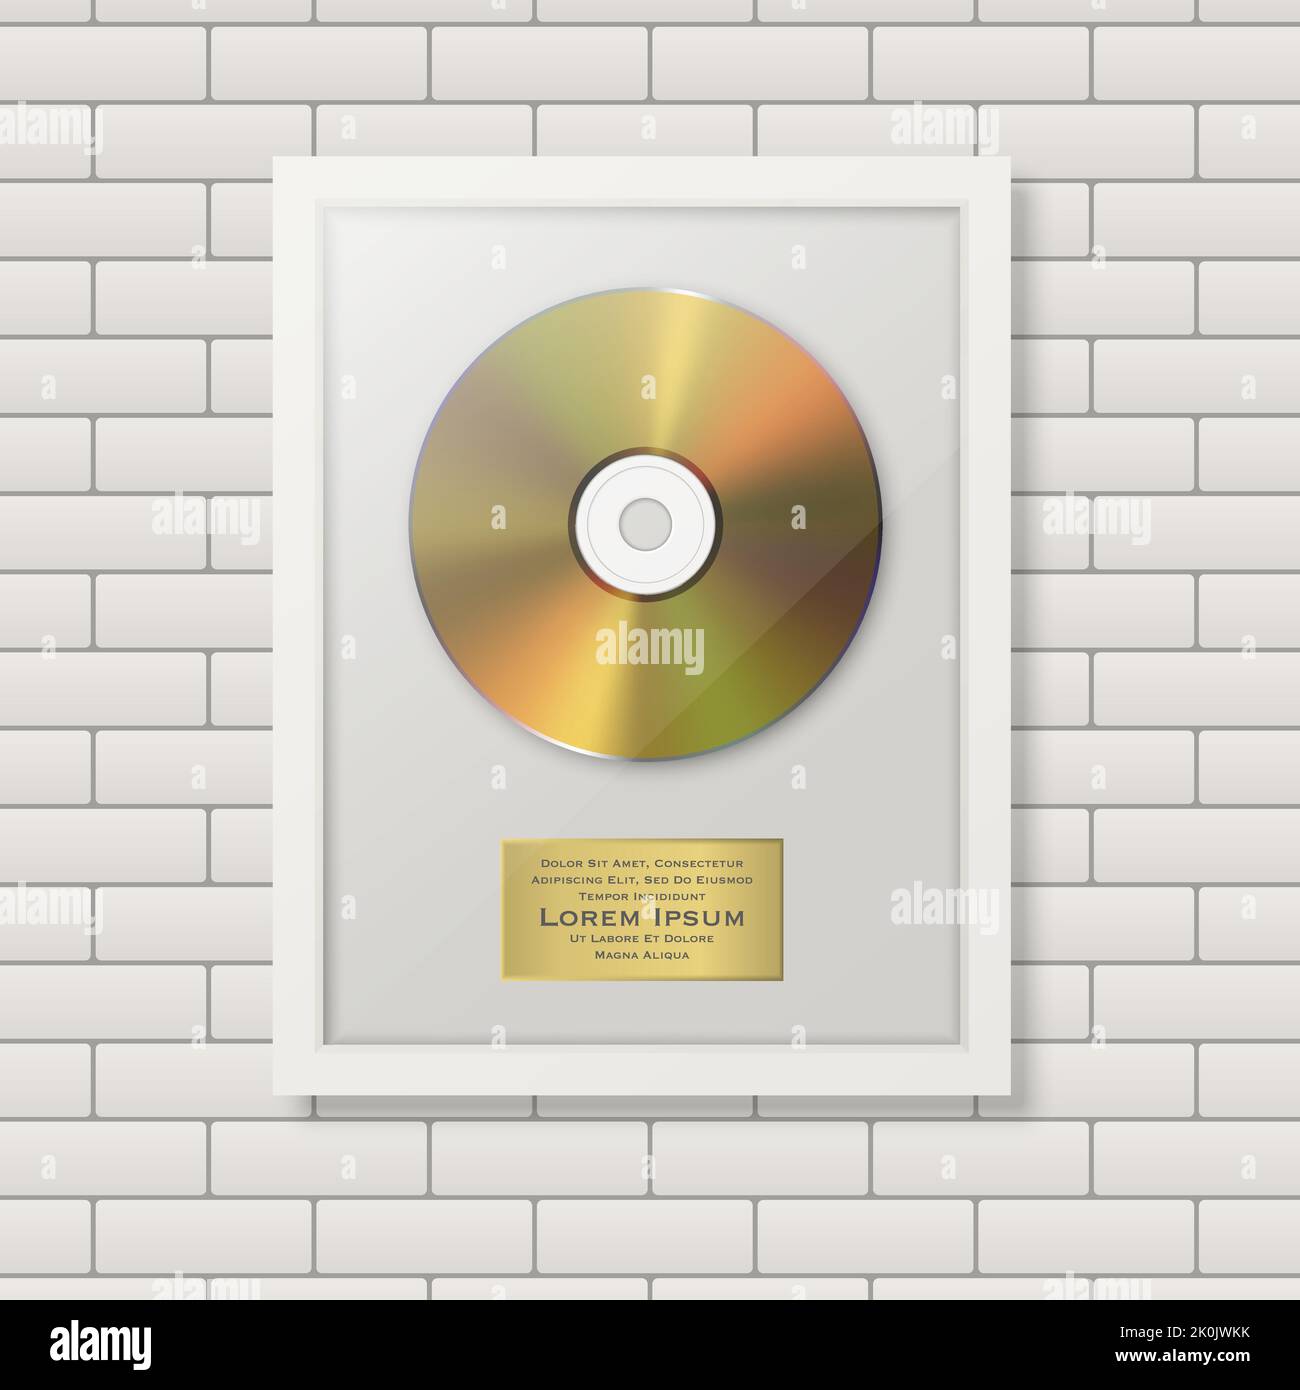 Realistic Vector 3d Golden Yellow CD and Label with White Frame on Brick Wall Background. Single Album Compact Disc Award, Limited Edition. Design Stock Vector